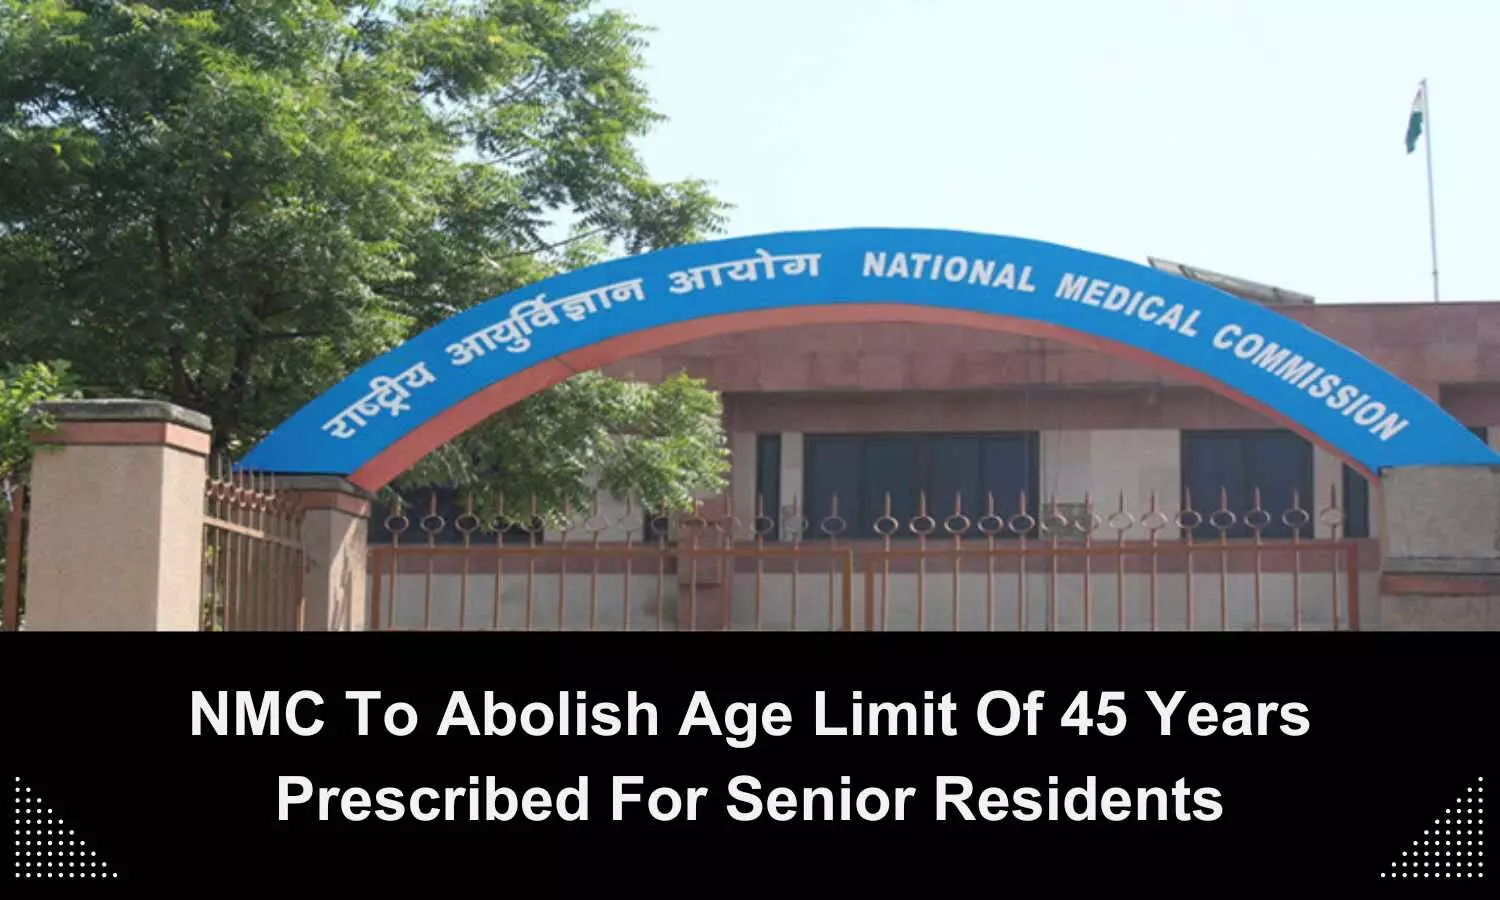 NMC to abolish age limit of 45 years prescribed for senior residents